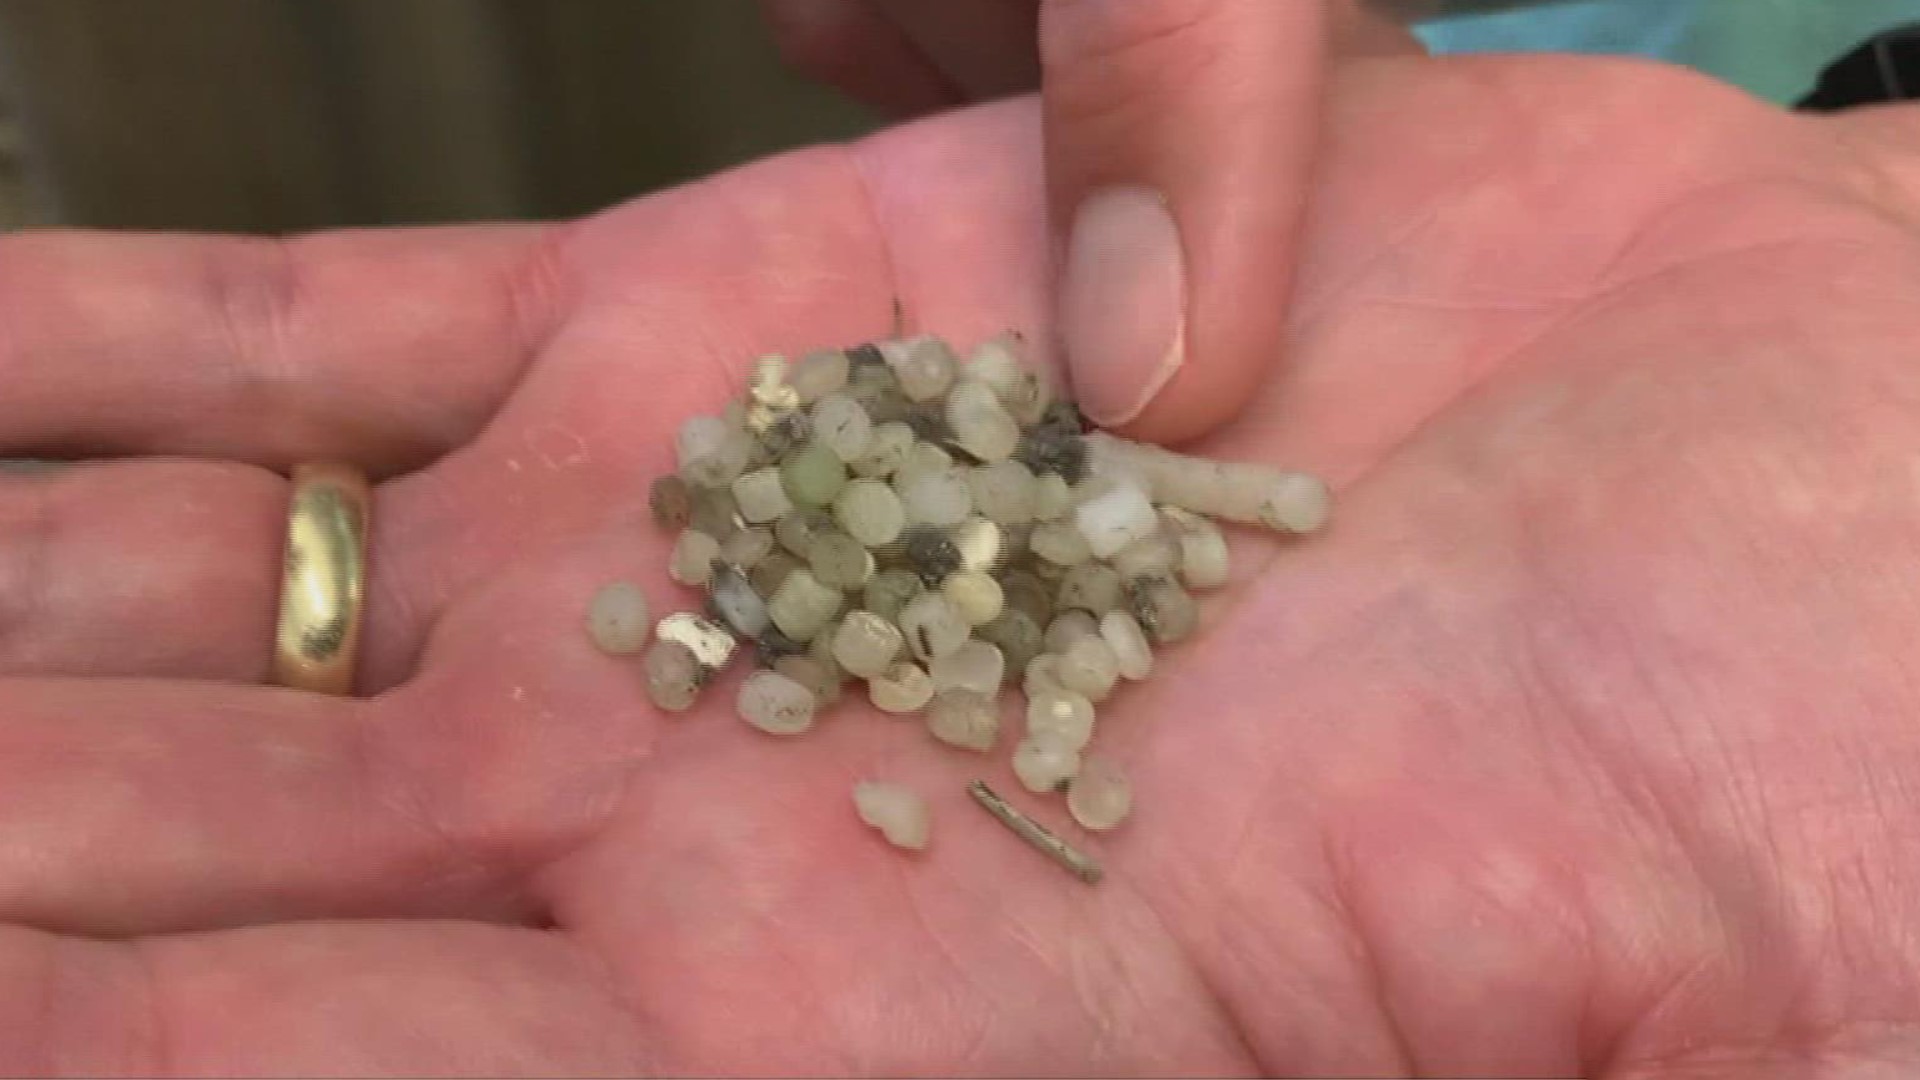 Nurdles are tiny pre-production plastic pellets which are eventually turned into everyday plastic items.